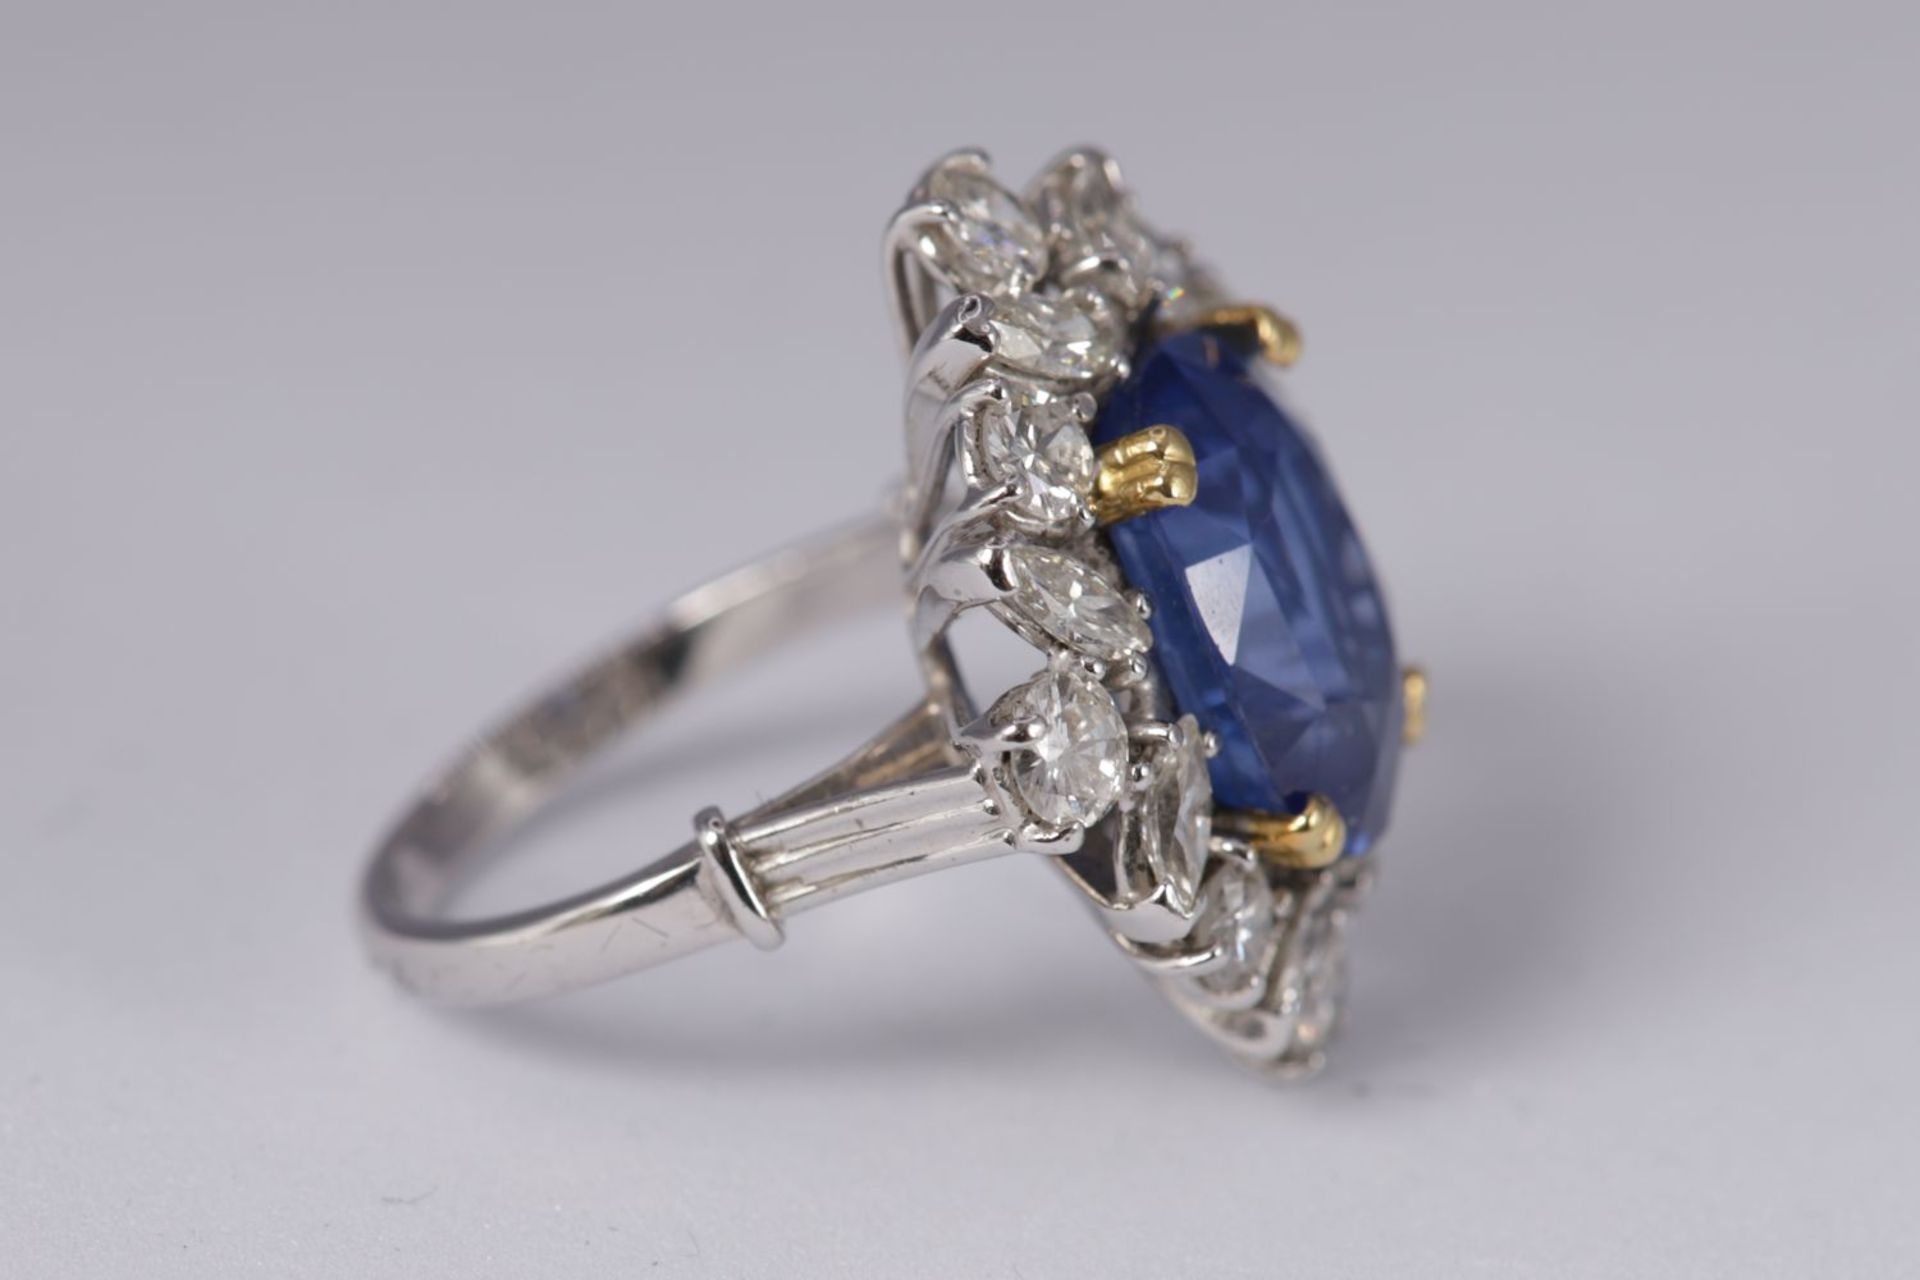 18K WHITE GOLD, SAPPHIRE & DIAMOND COCKTAIL RING - Image 3 of 4